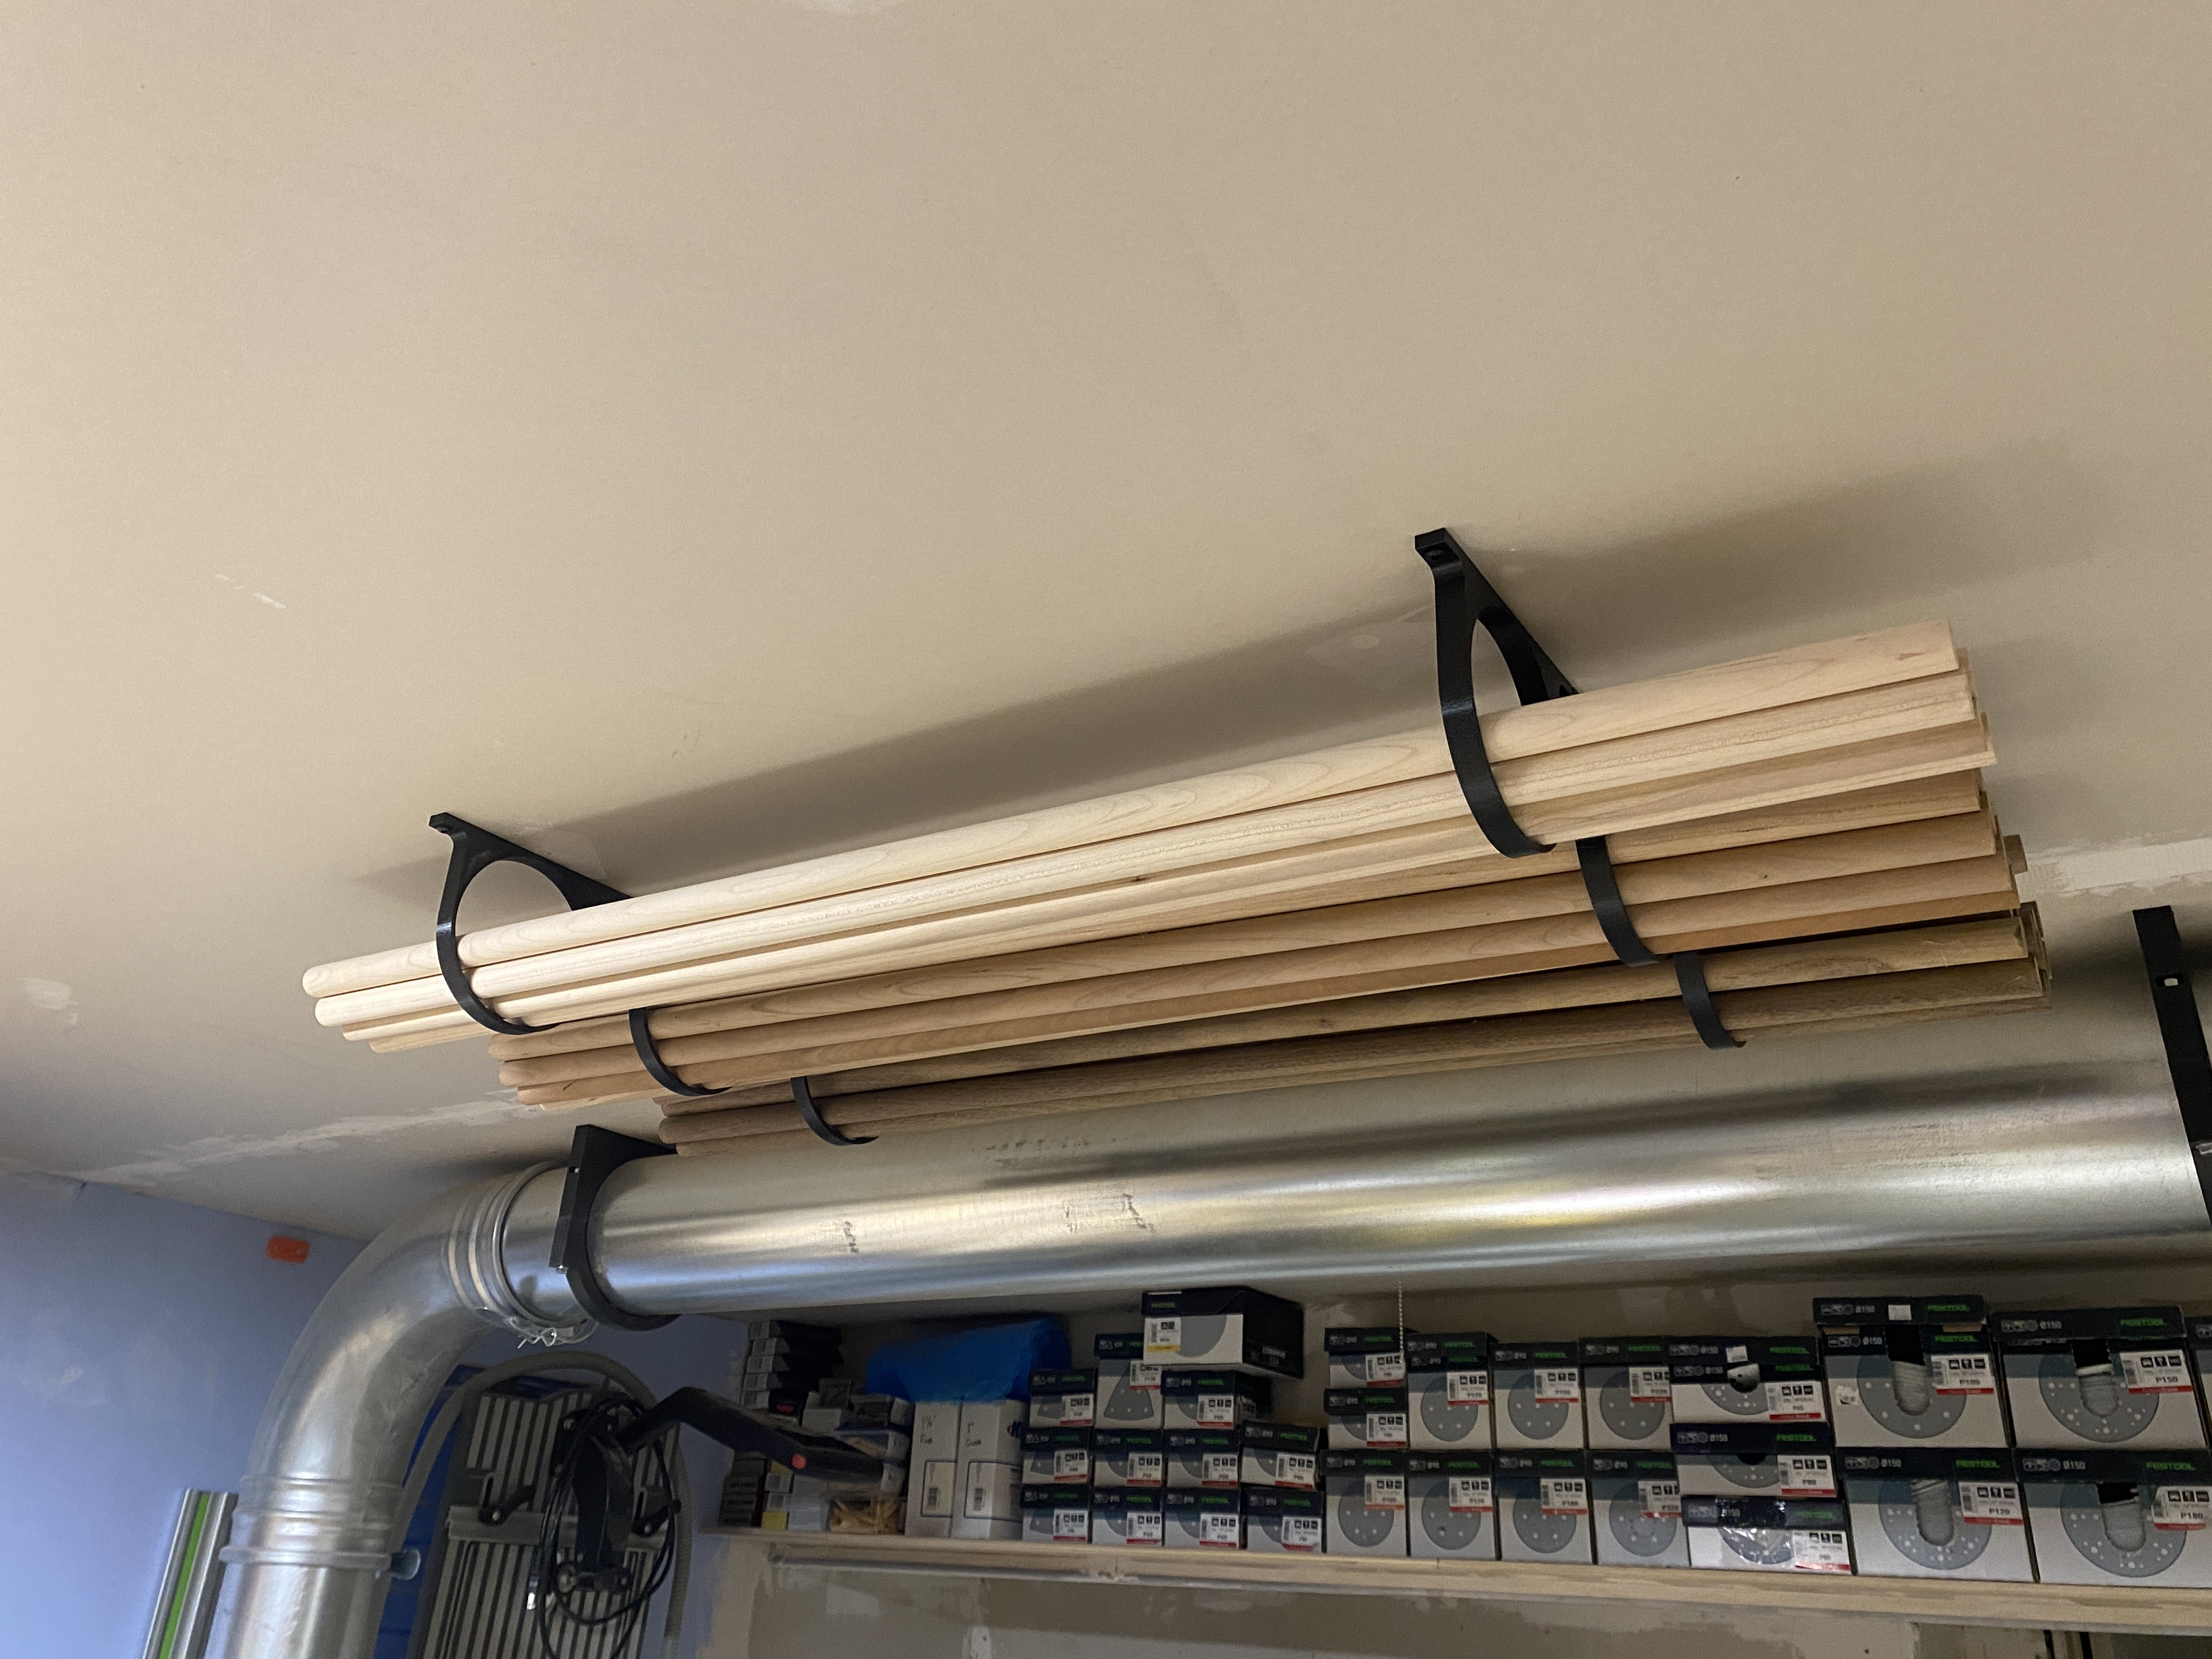 Dowel rod holder for ceiling or wall 4" holders